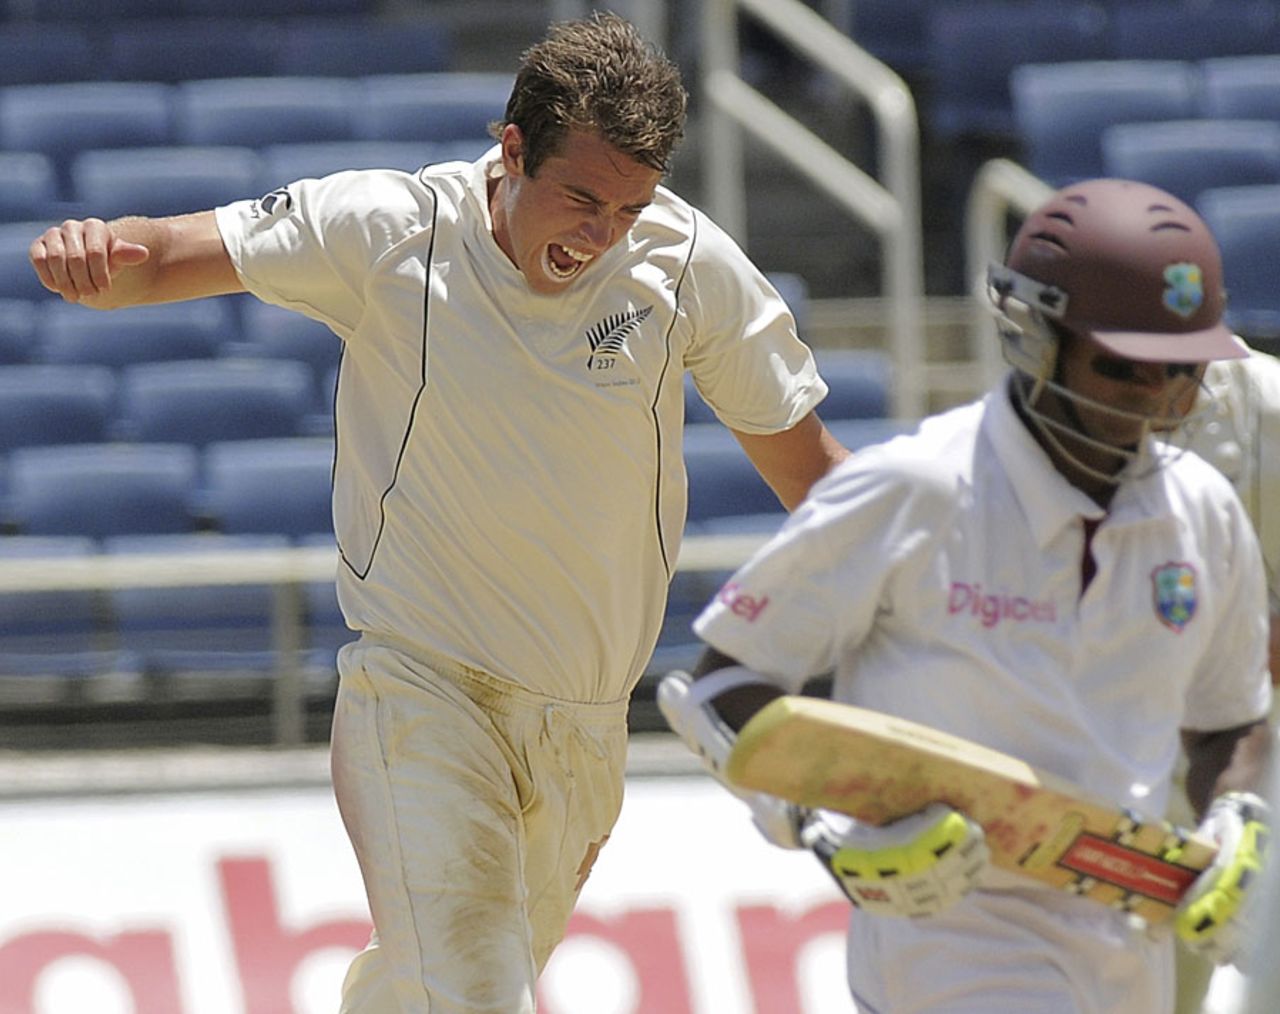 Tim Southee is thrilled after getting rid of Shivnarine Chanderpaul, West Indies v New Zealand, 2nd Test, Jamaica, 2nd day, August 3, 2012